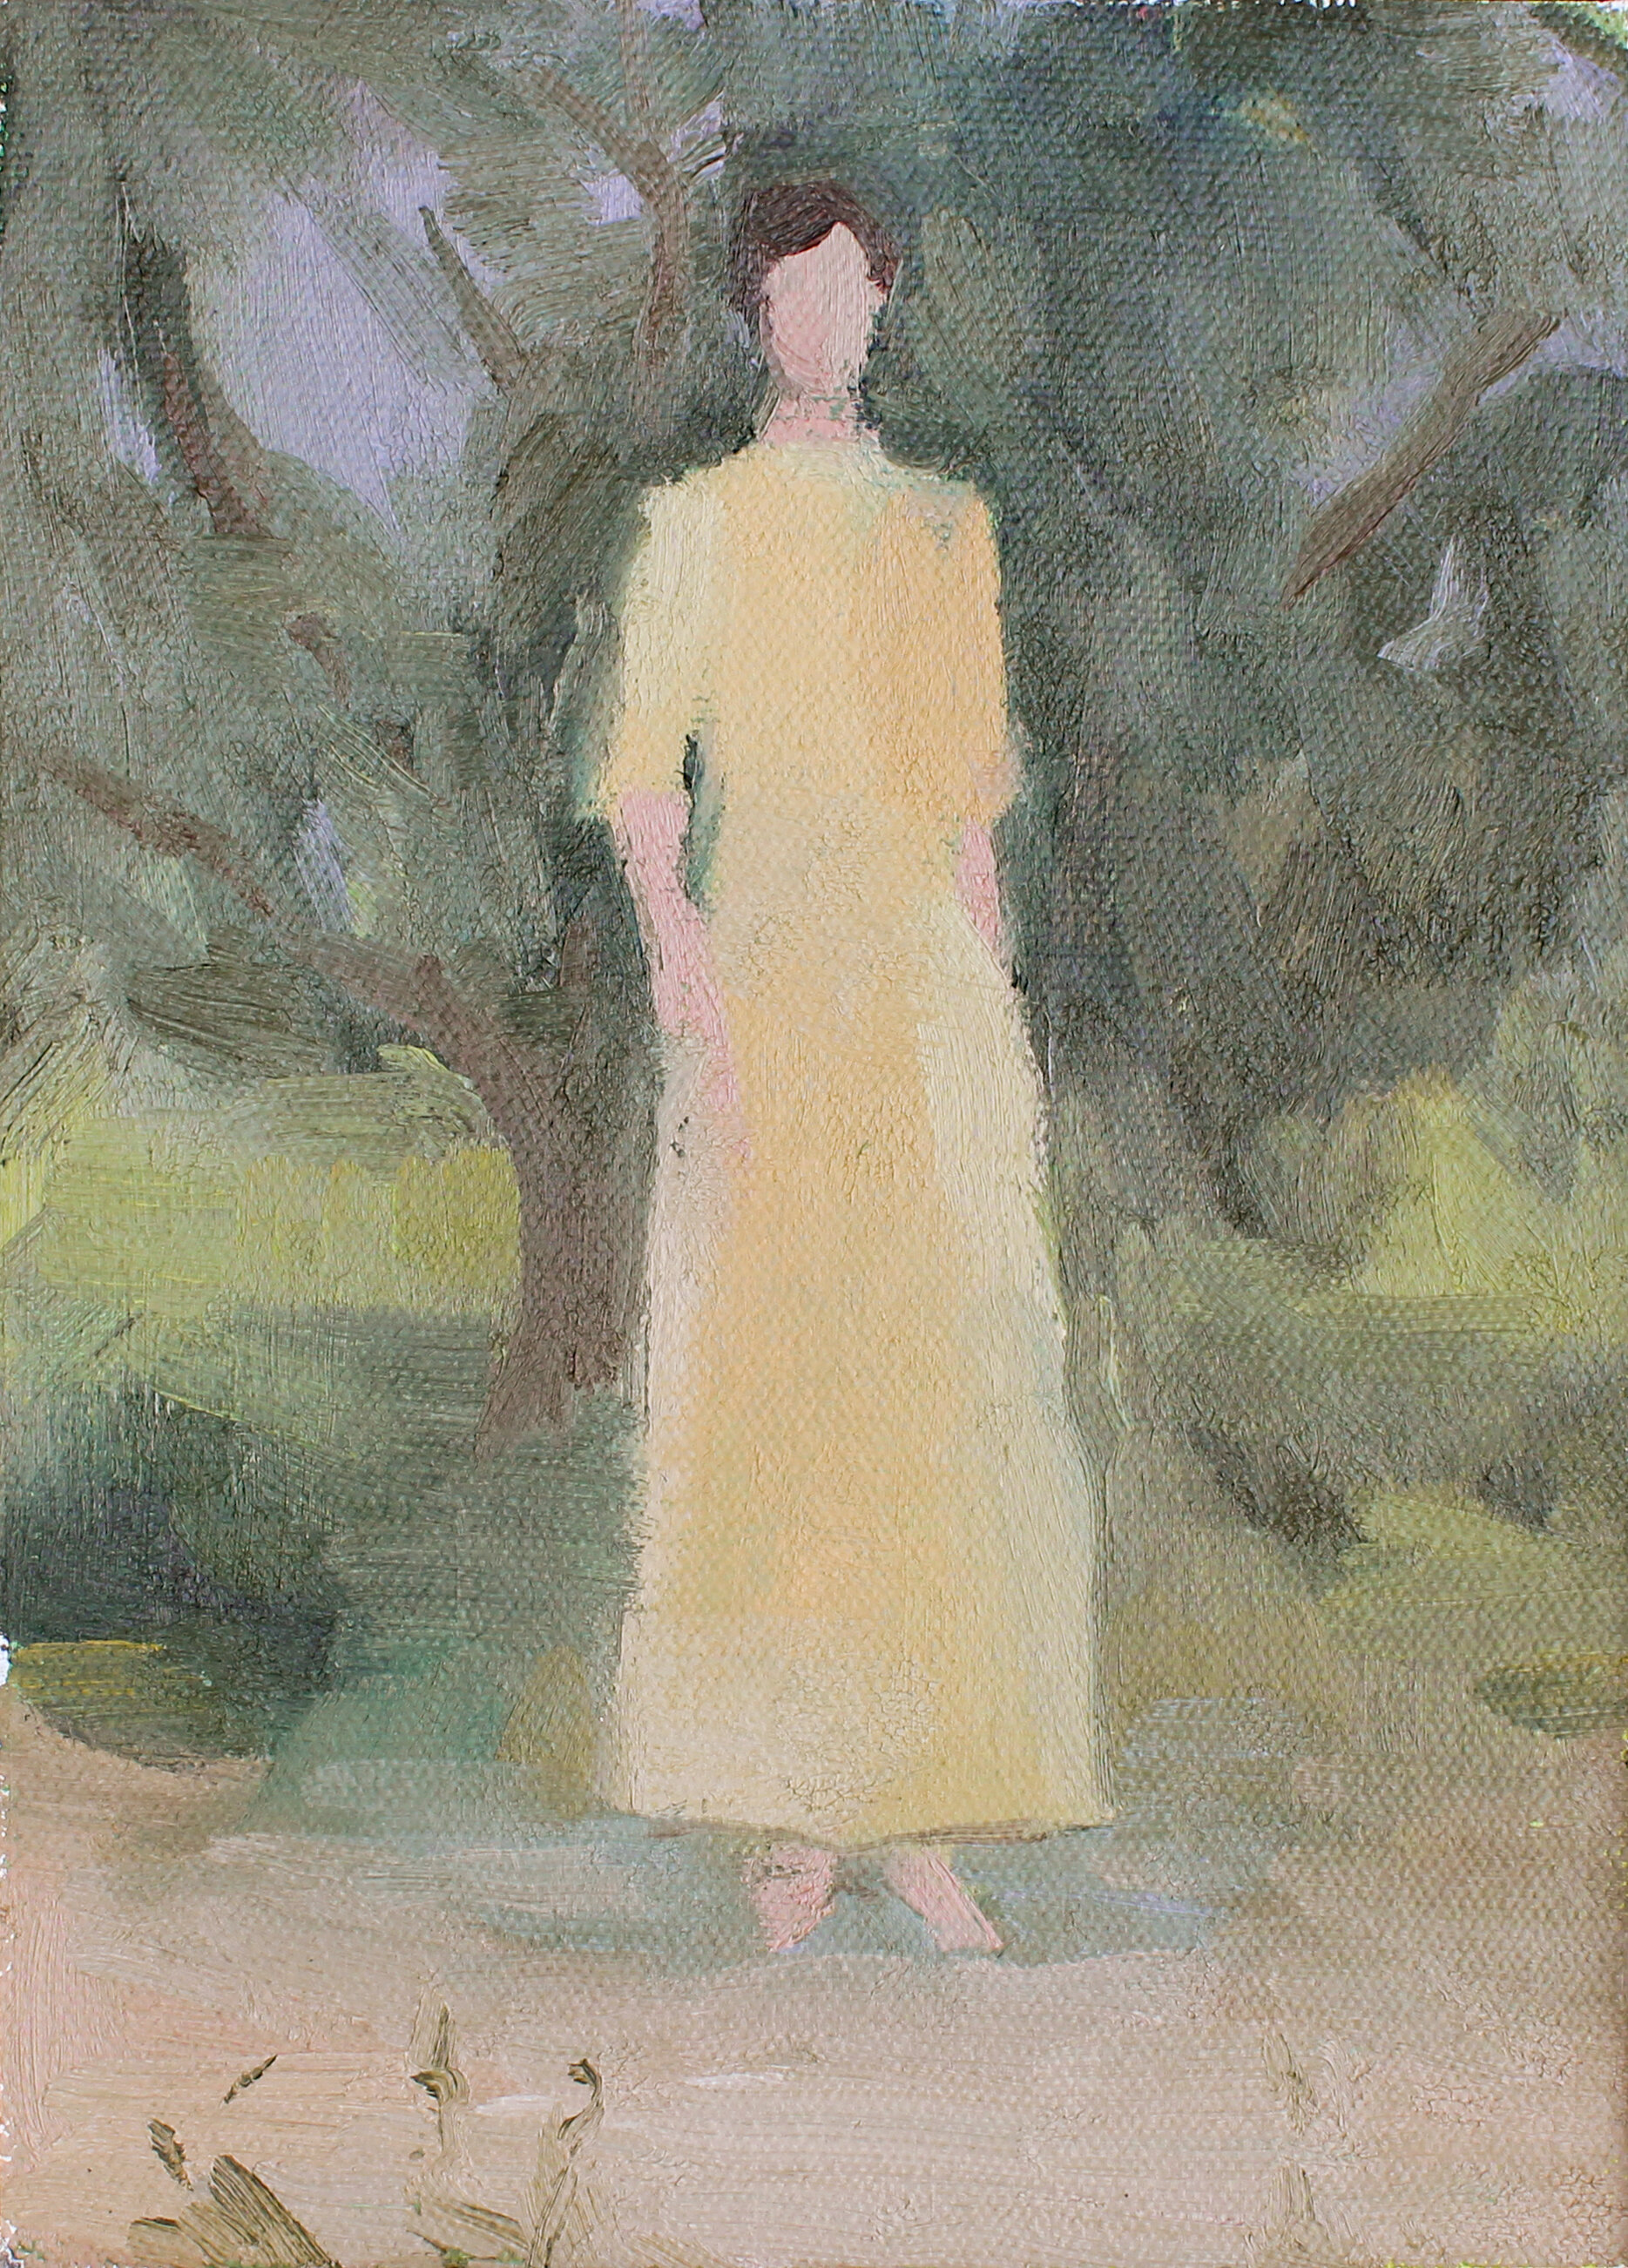    woman in a yellow dress     oil on canvas 5x7" 2017  private collection New Jersey 